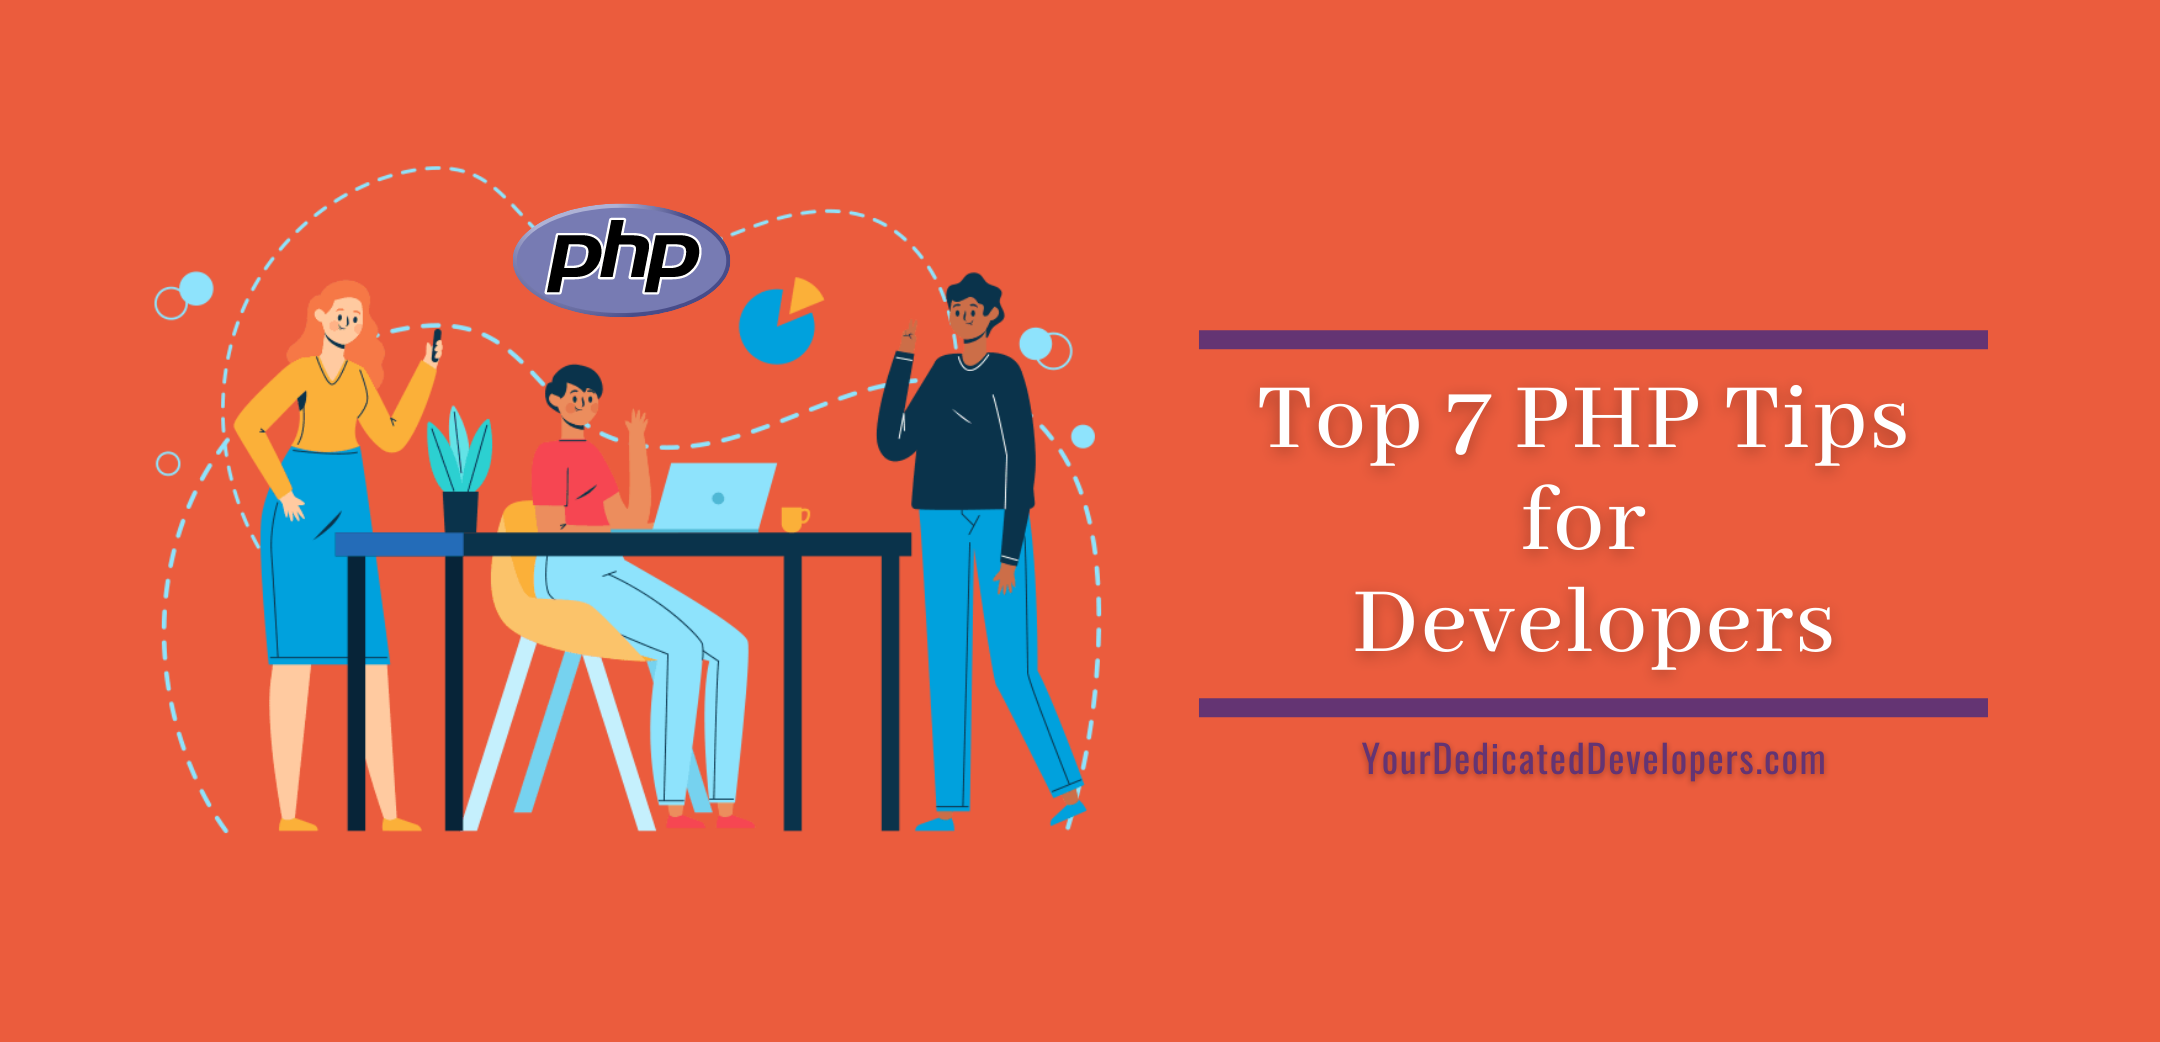 Top-notch tips to improve your PHP web development skills